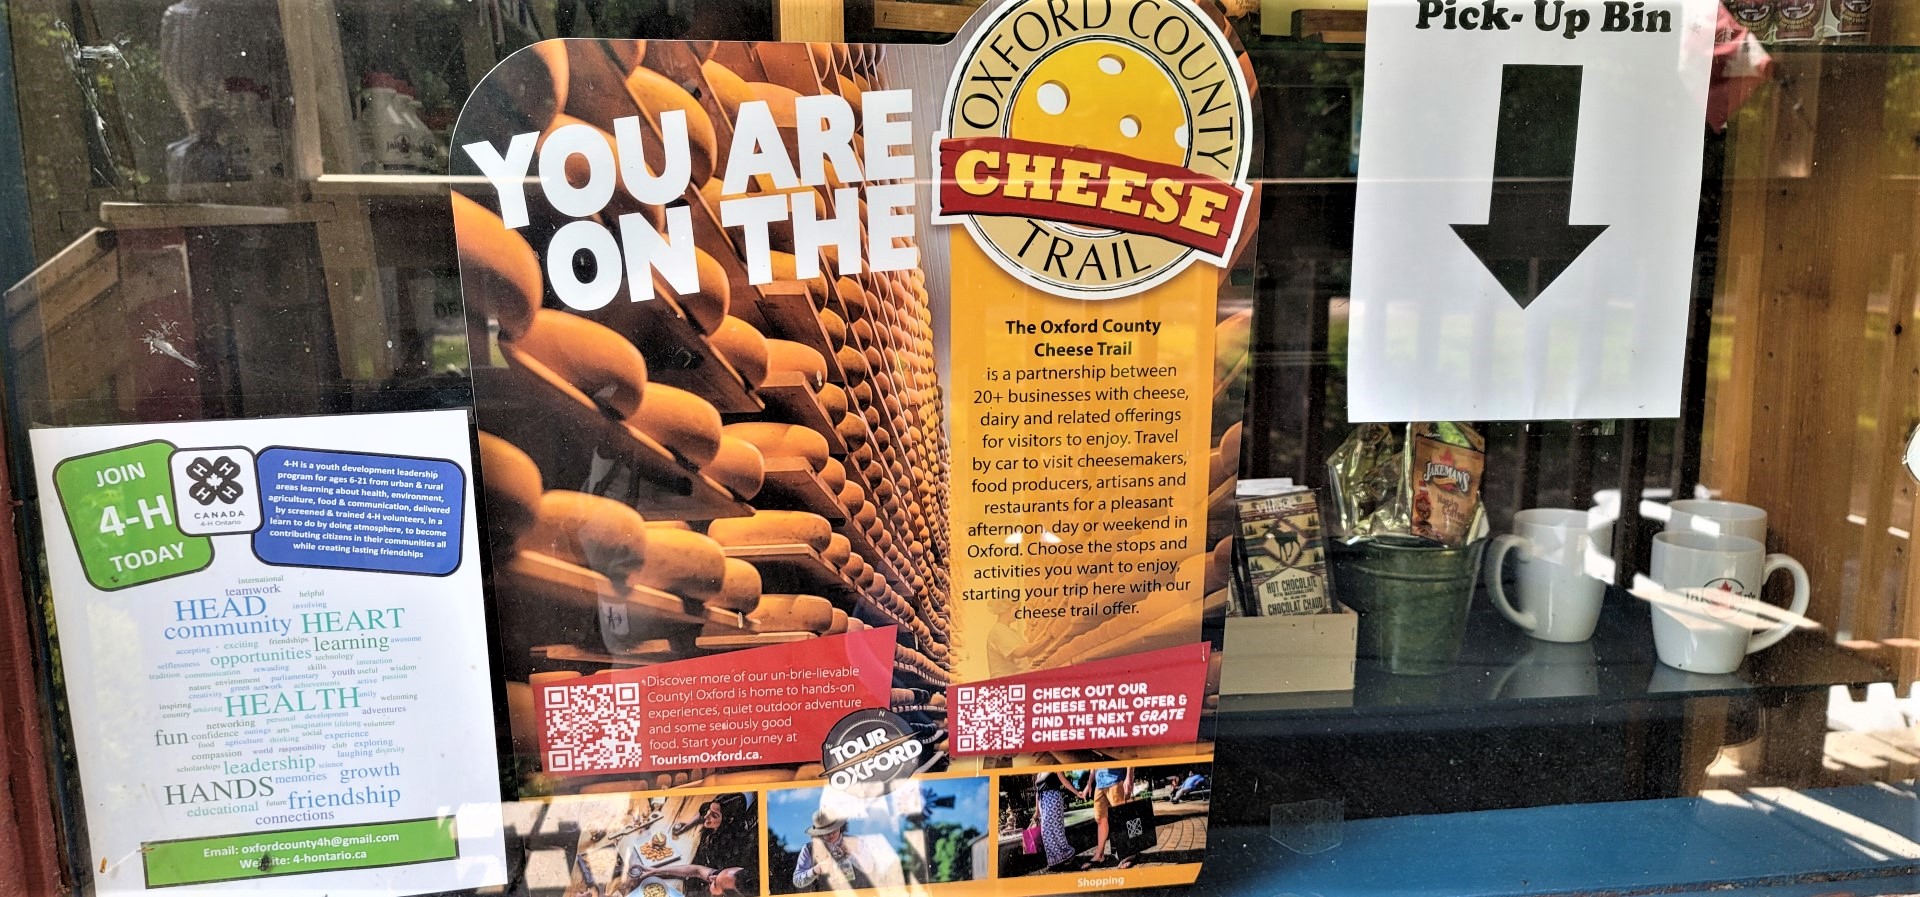 Oxford County cheese trail sign